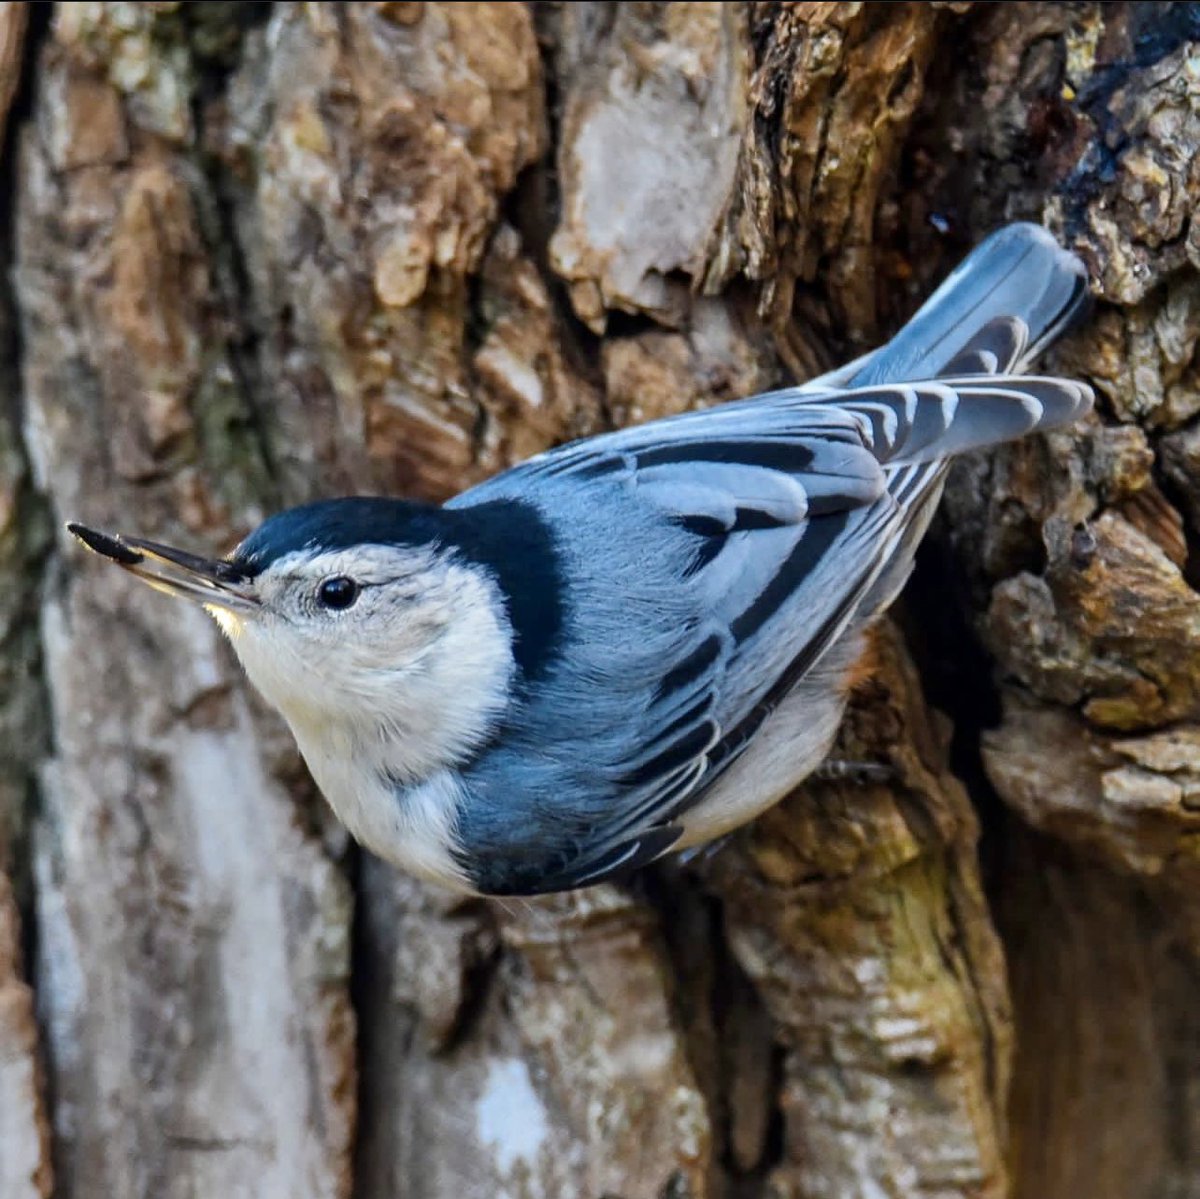 Ever since the Nuthatch found lunch things have been looking up.  #whitebreastednuthatch #nuthatch #BirdsOfTwitter #BirdsSeenIn2022 #birdsphotography #burd #birds #wildlifephotography #TwitterNaturePhotography #TwitterNatureCommunity #birdsontwitter